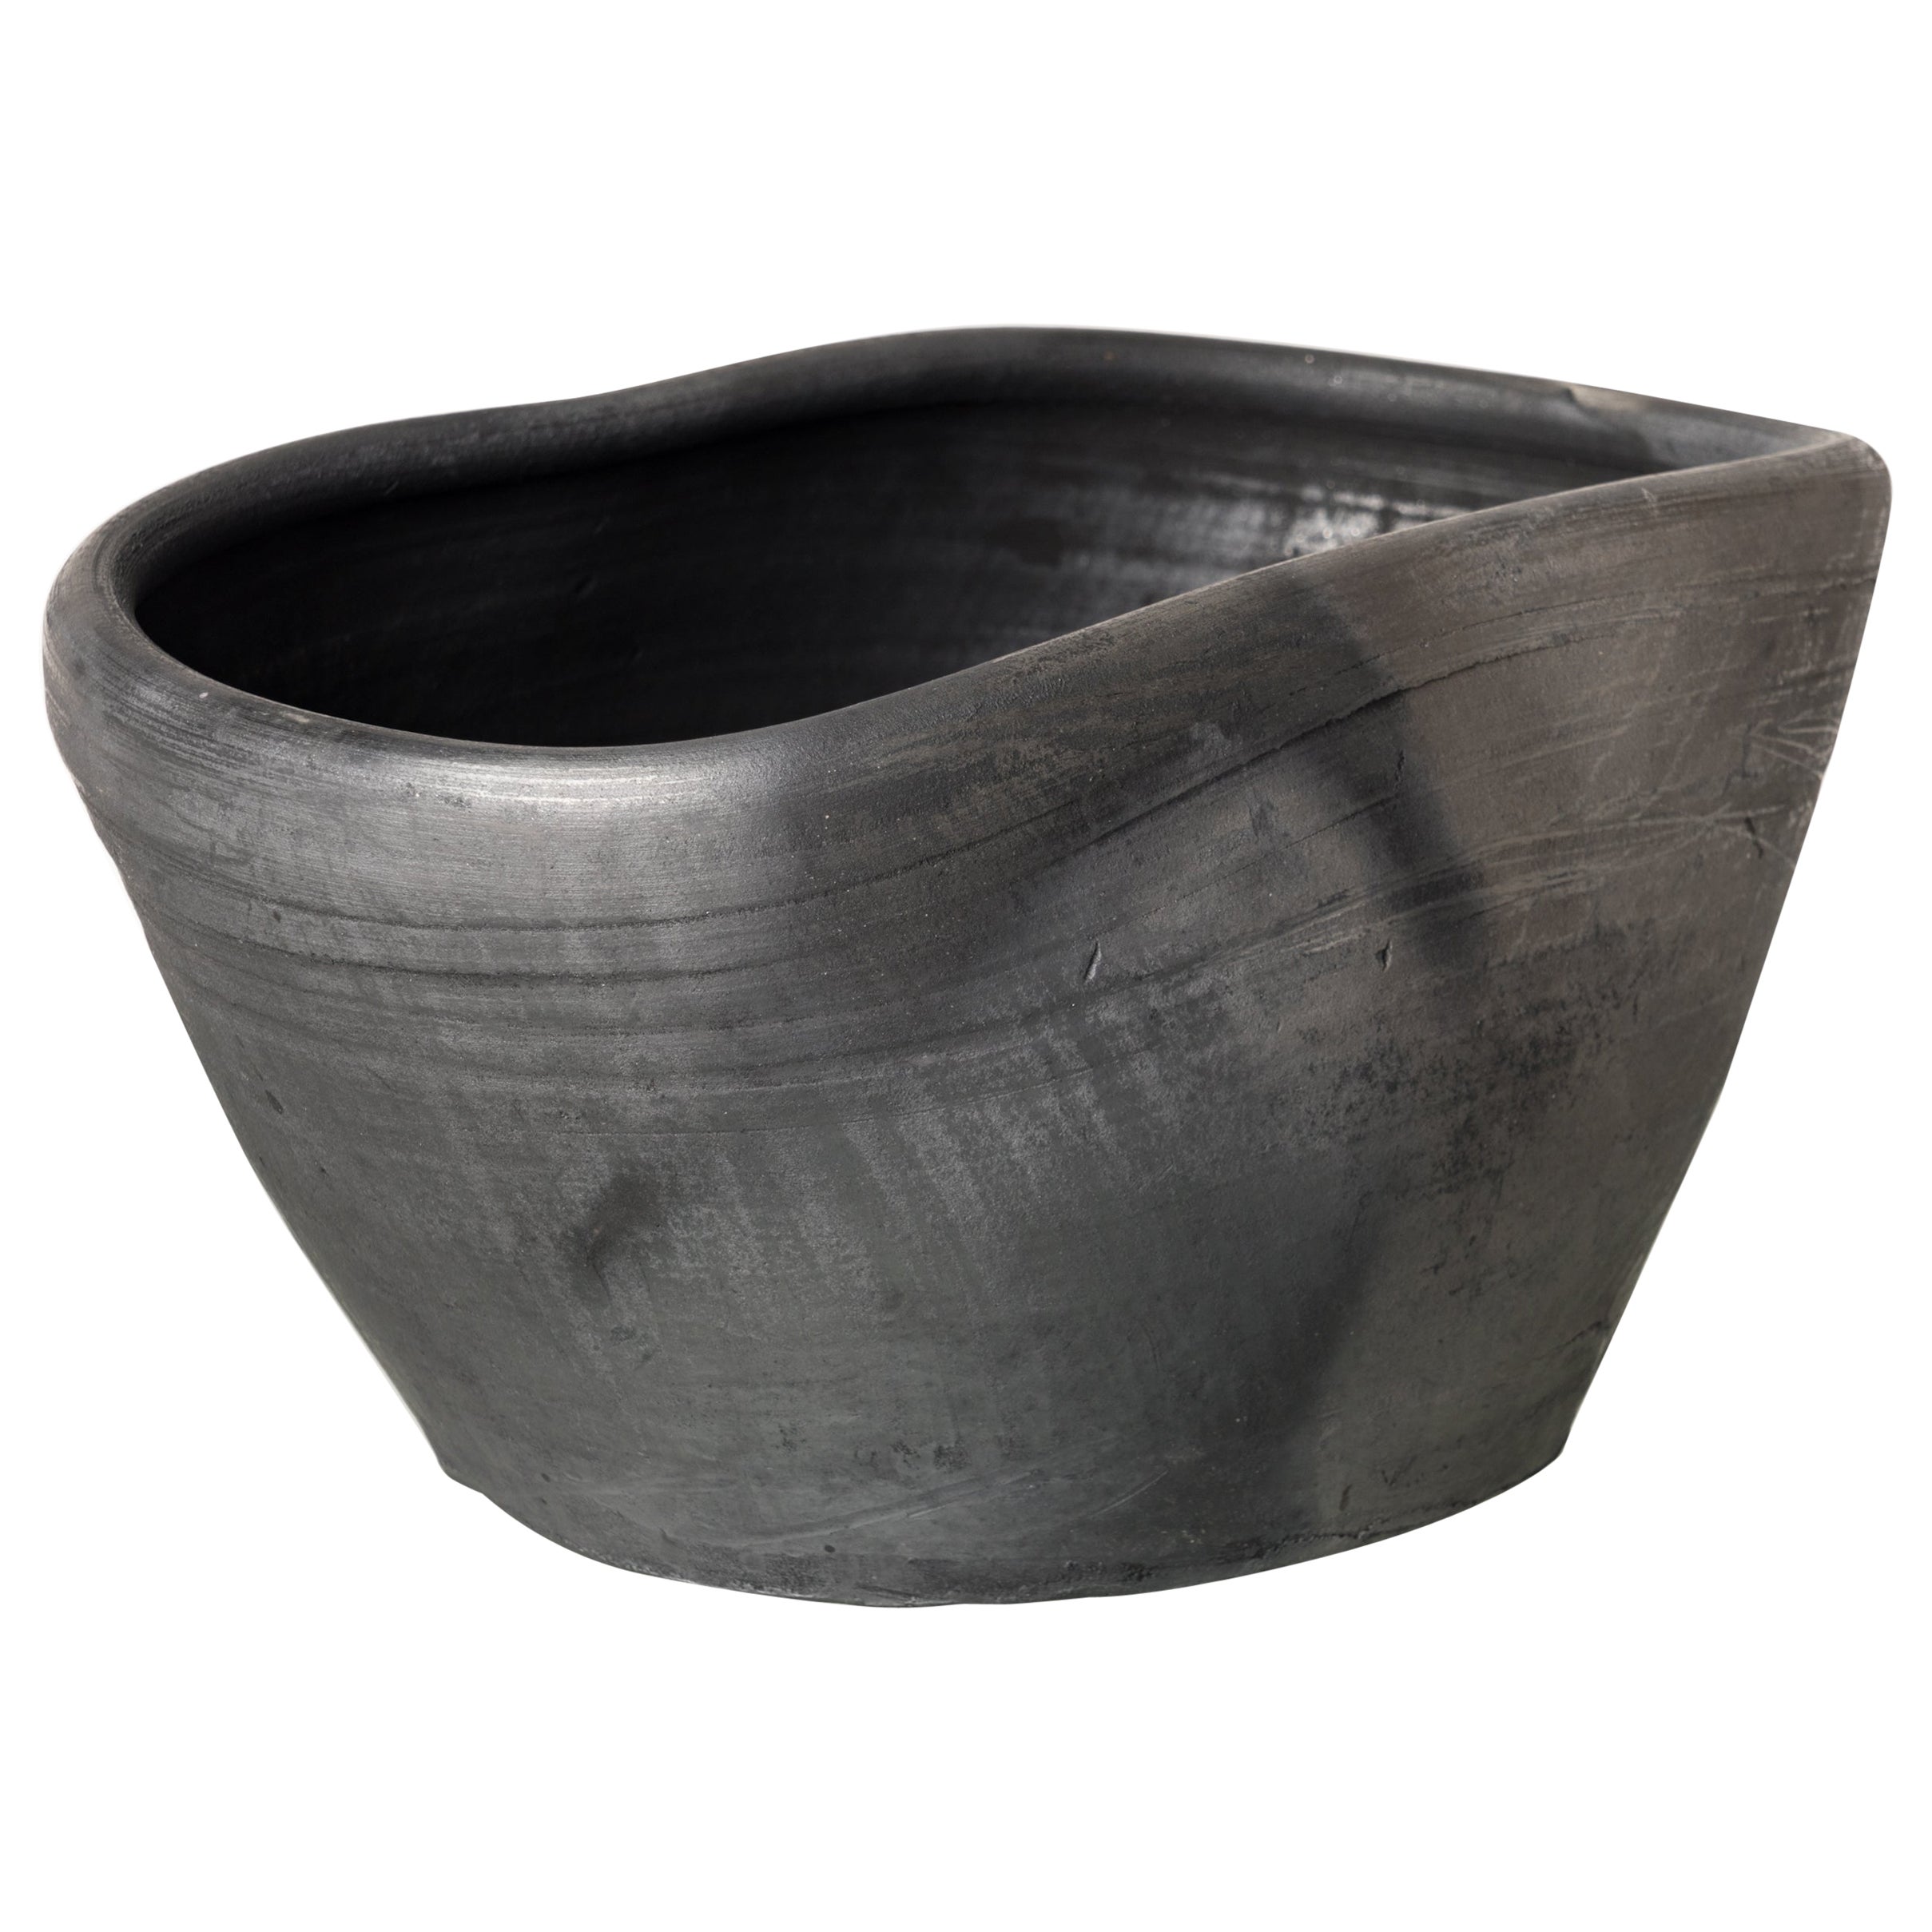 "Carbone" Charcoal & Silver Terracotta Dish by Facto Atelier Paris, France, 2022